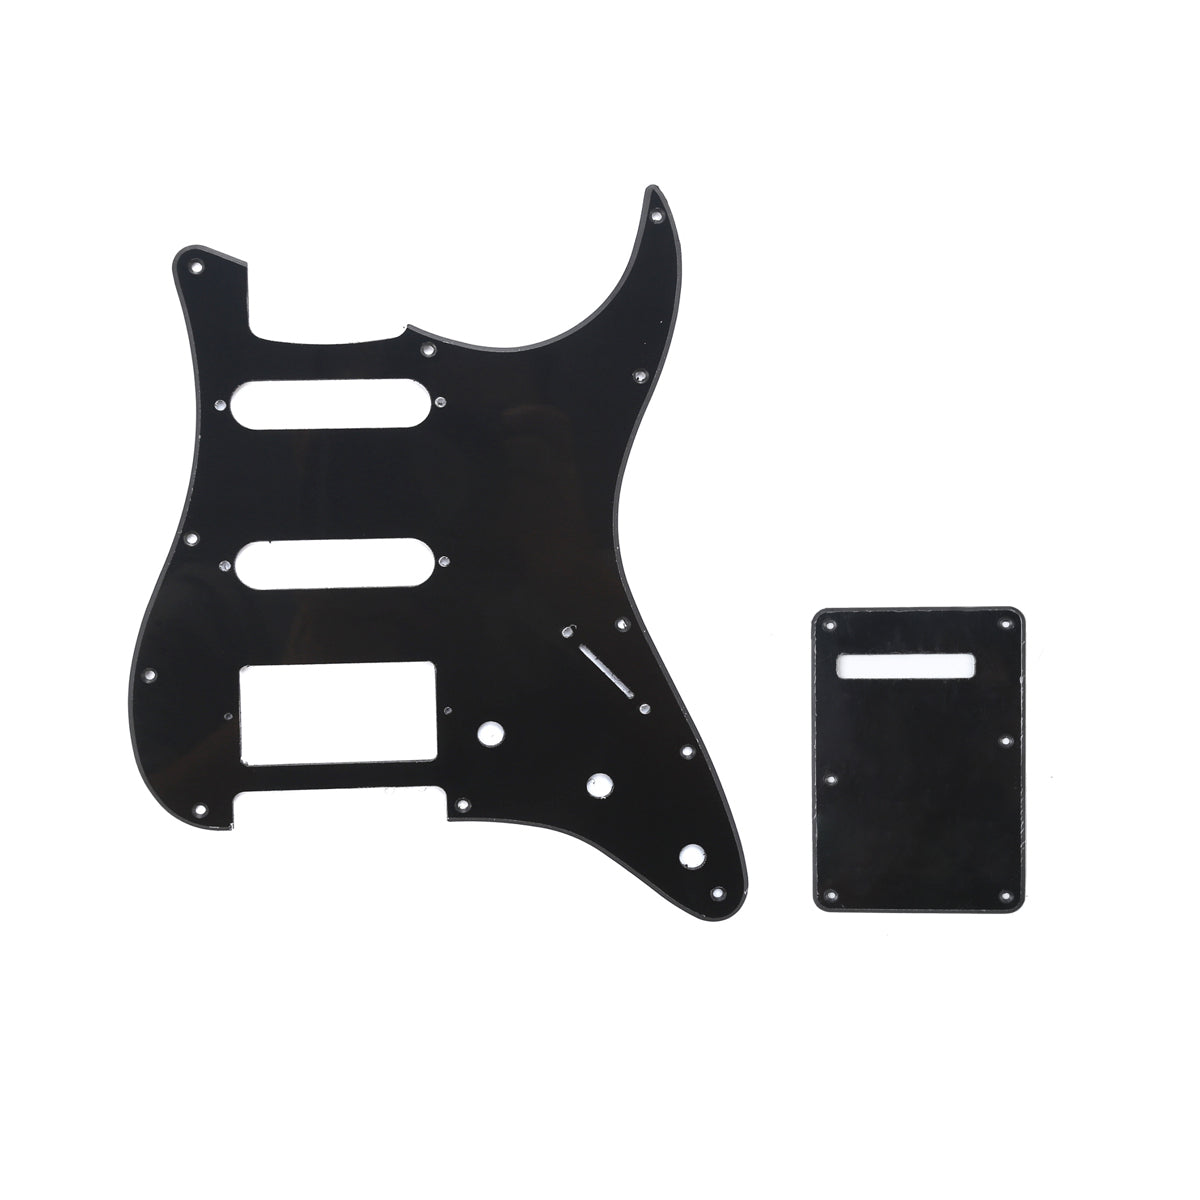 Musiclily SSH 11 Hole Strat Guitar Pickguard and BackPlate Set for Fender USA/Mexican Standard Stratocaster Modern Style, 1Ply Black